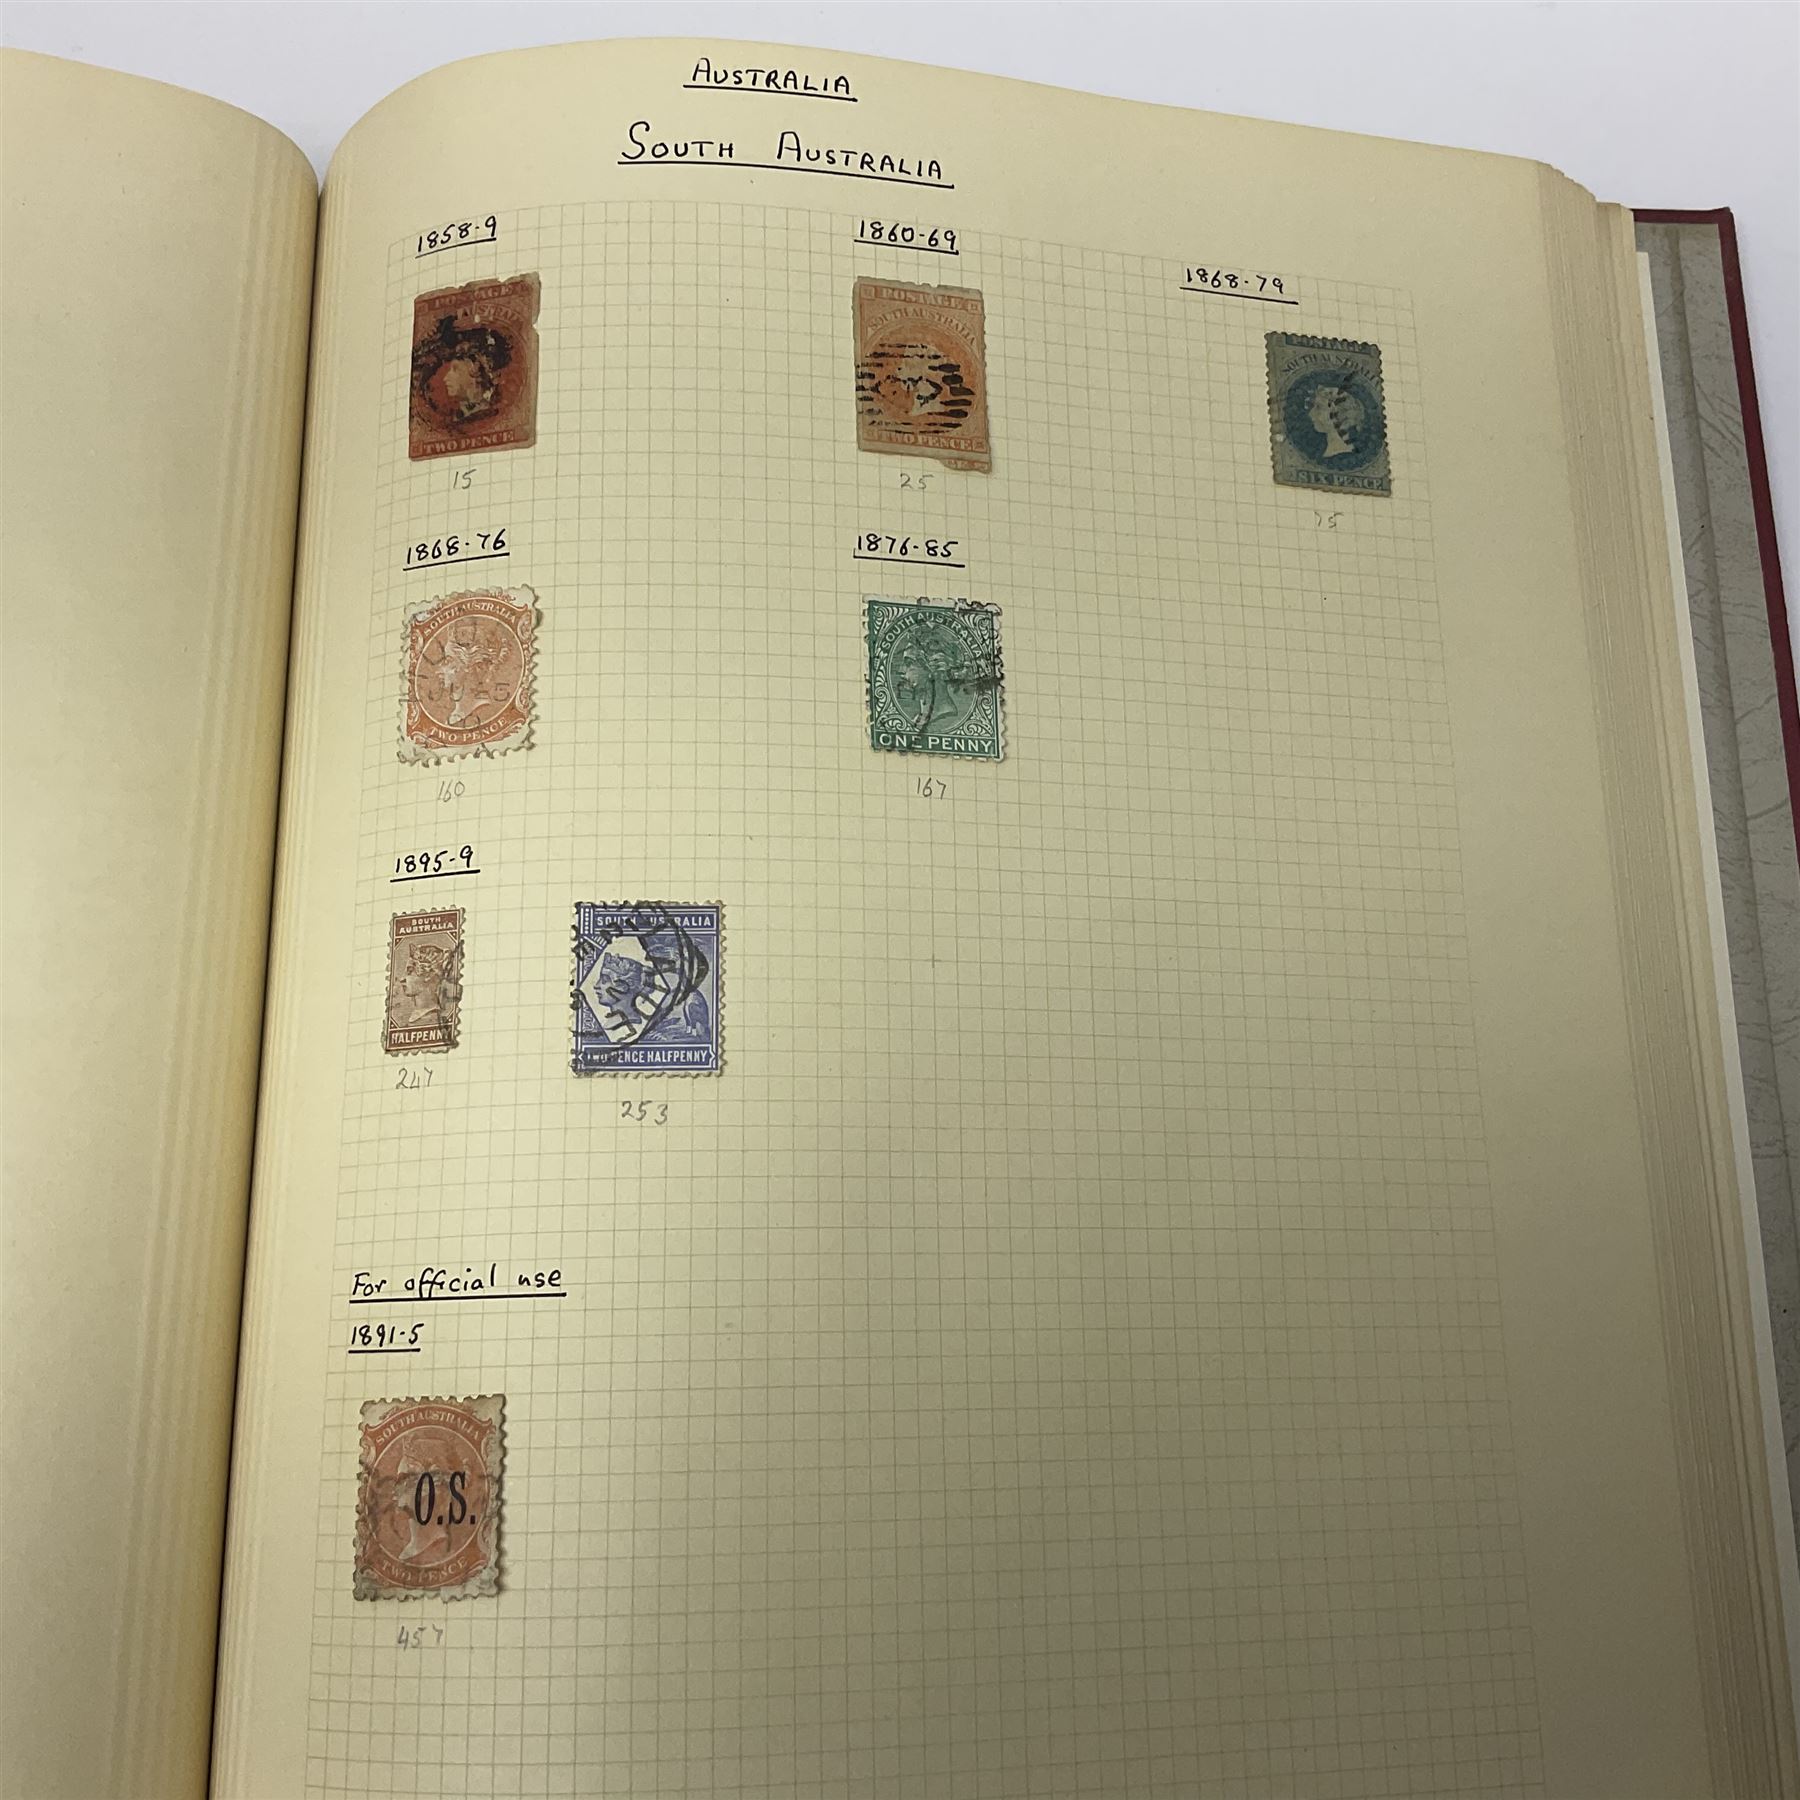 Queen Victoria and later Great British and World stamps - Image 20 of 25